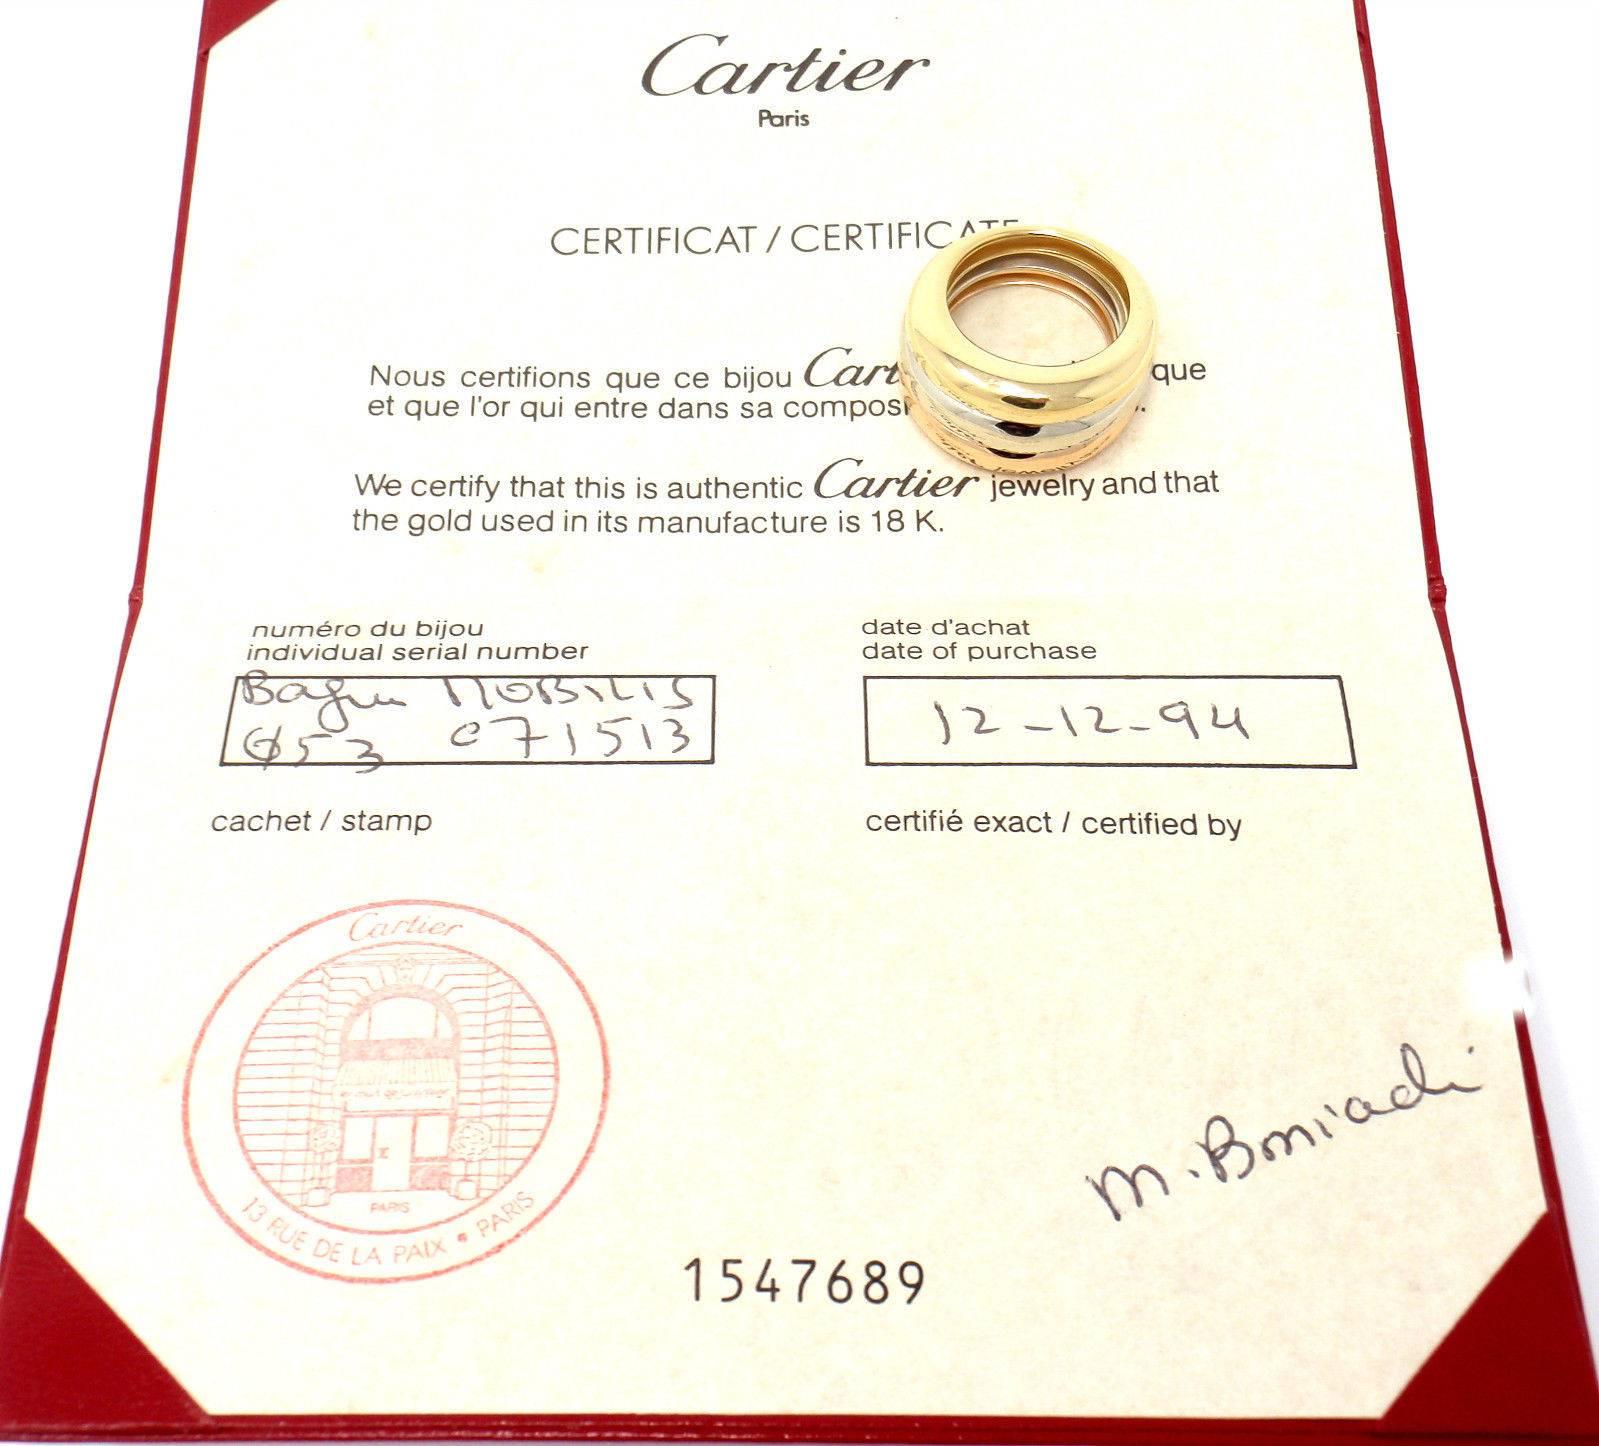 18k Tri-Color Gold Wide Stacking Band Ring by Cartier.
This ring comes with Cartier certificate.
Details:
Size: European 53, US 6 1/4
Weight: 18.5 grams
Width: 13mm; 5mm each band
Stamped Hallmarks: Cartier 750 53 1994 C71513
*Free Shipping within